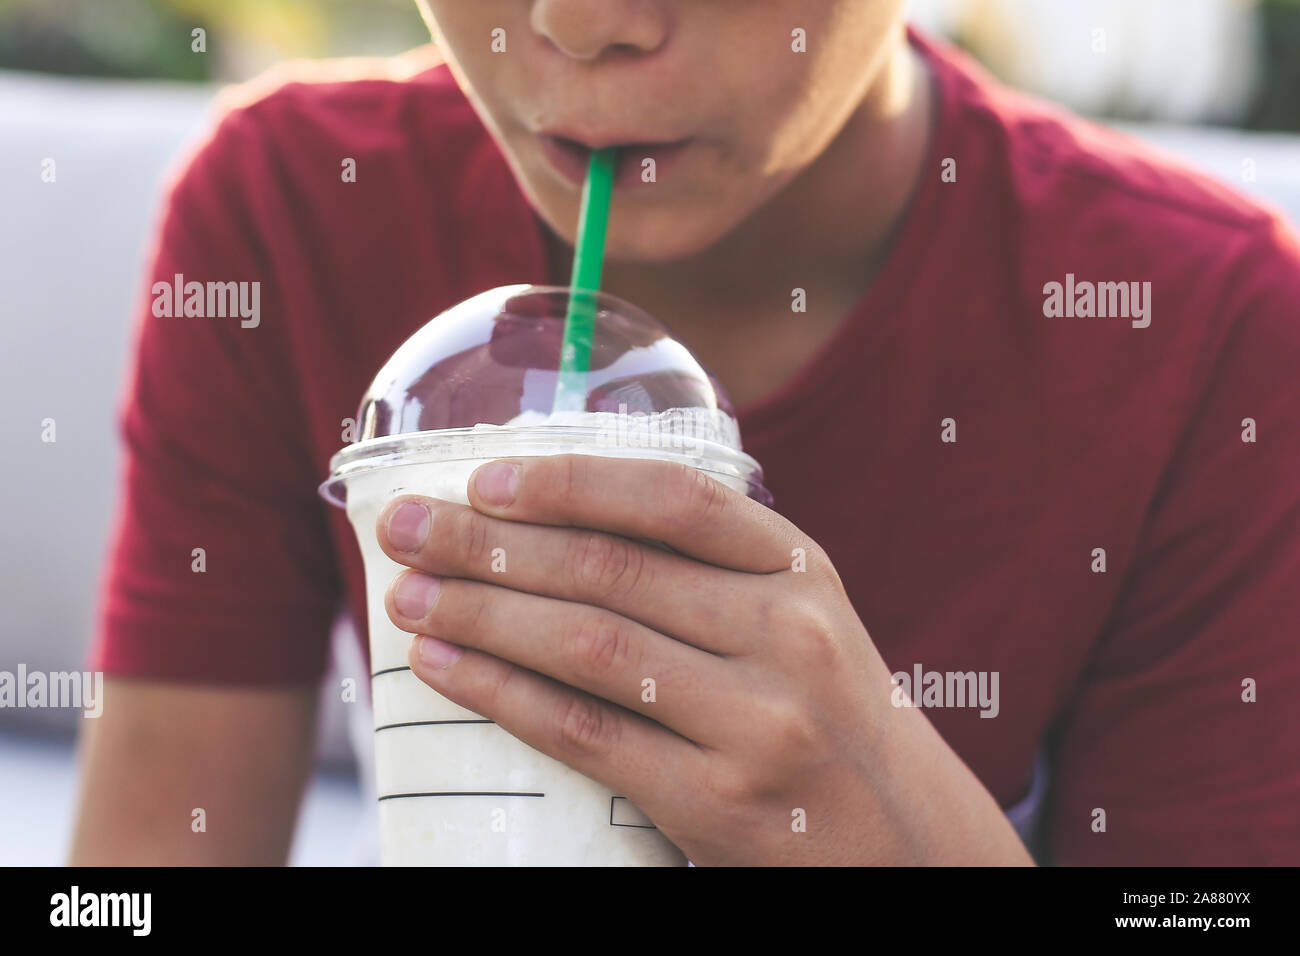 https://c8.alamy.com/comp/2A880YX/close-up-view-of-a-young-boy-hand-holding-a-glass-with-smoothie-mouth-with-drinking-straw-in-background-teen-drinks-a-cold-beverage-outside-in-the-g-2A880YX.jpg